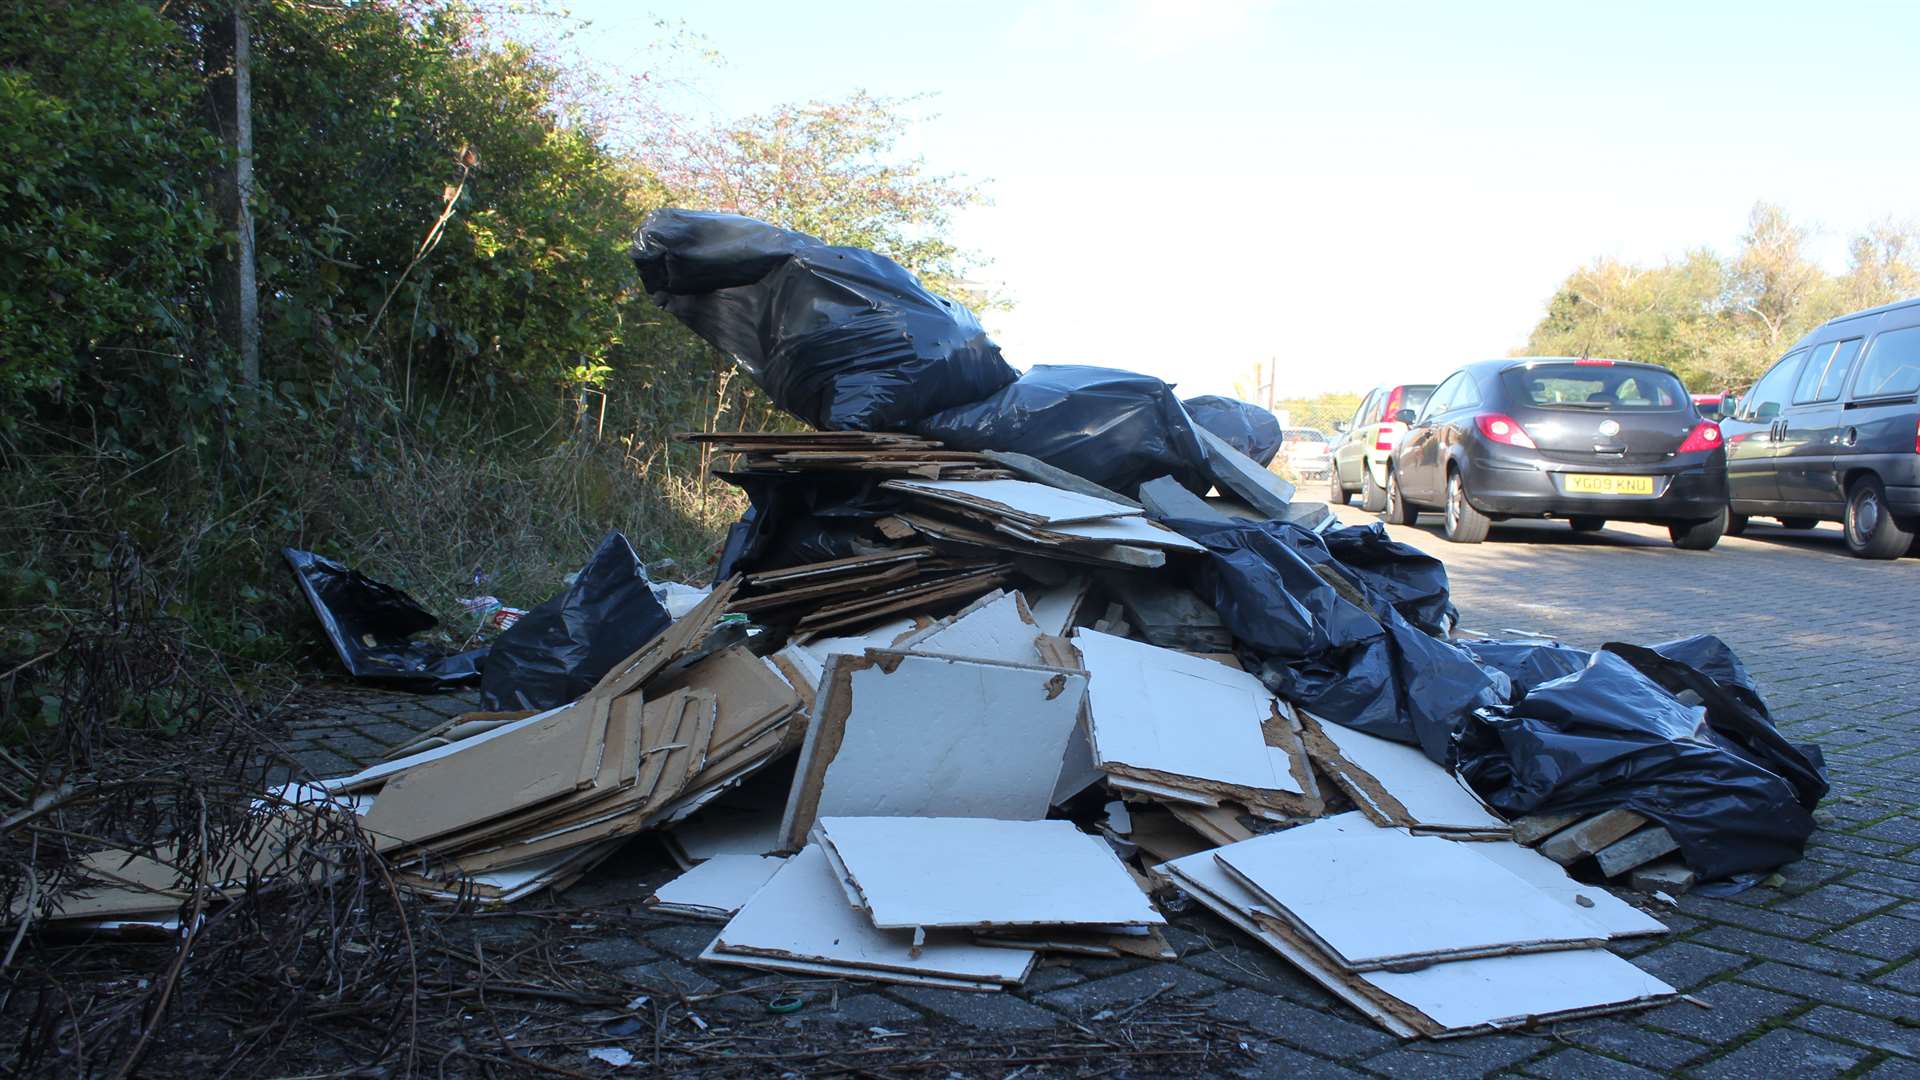 This is the state one fly-tipper left. Picture: Joe Wright